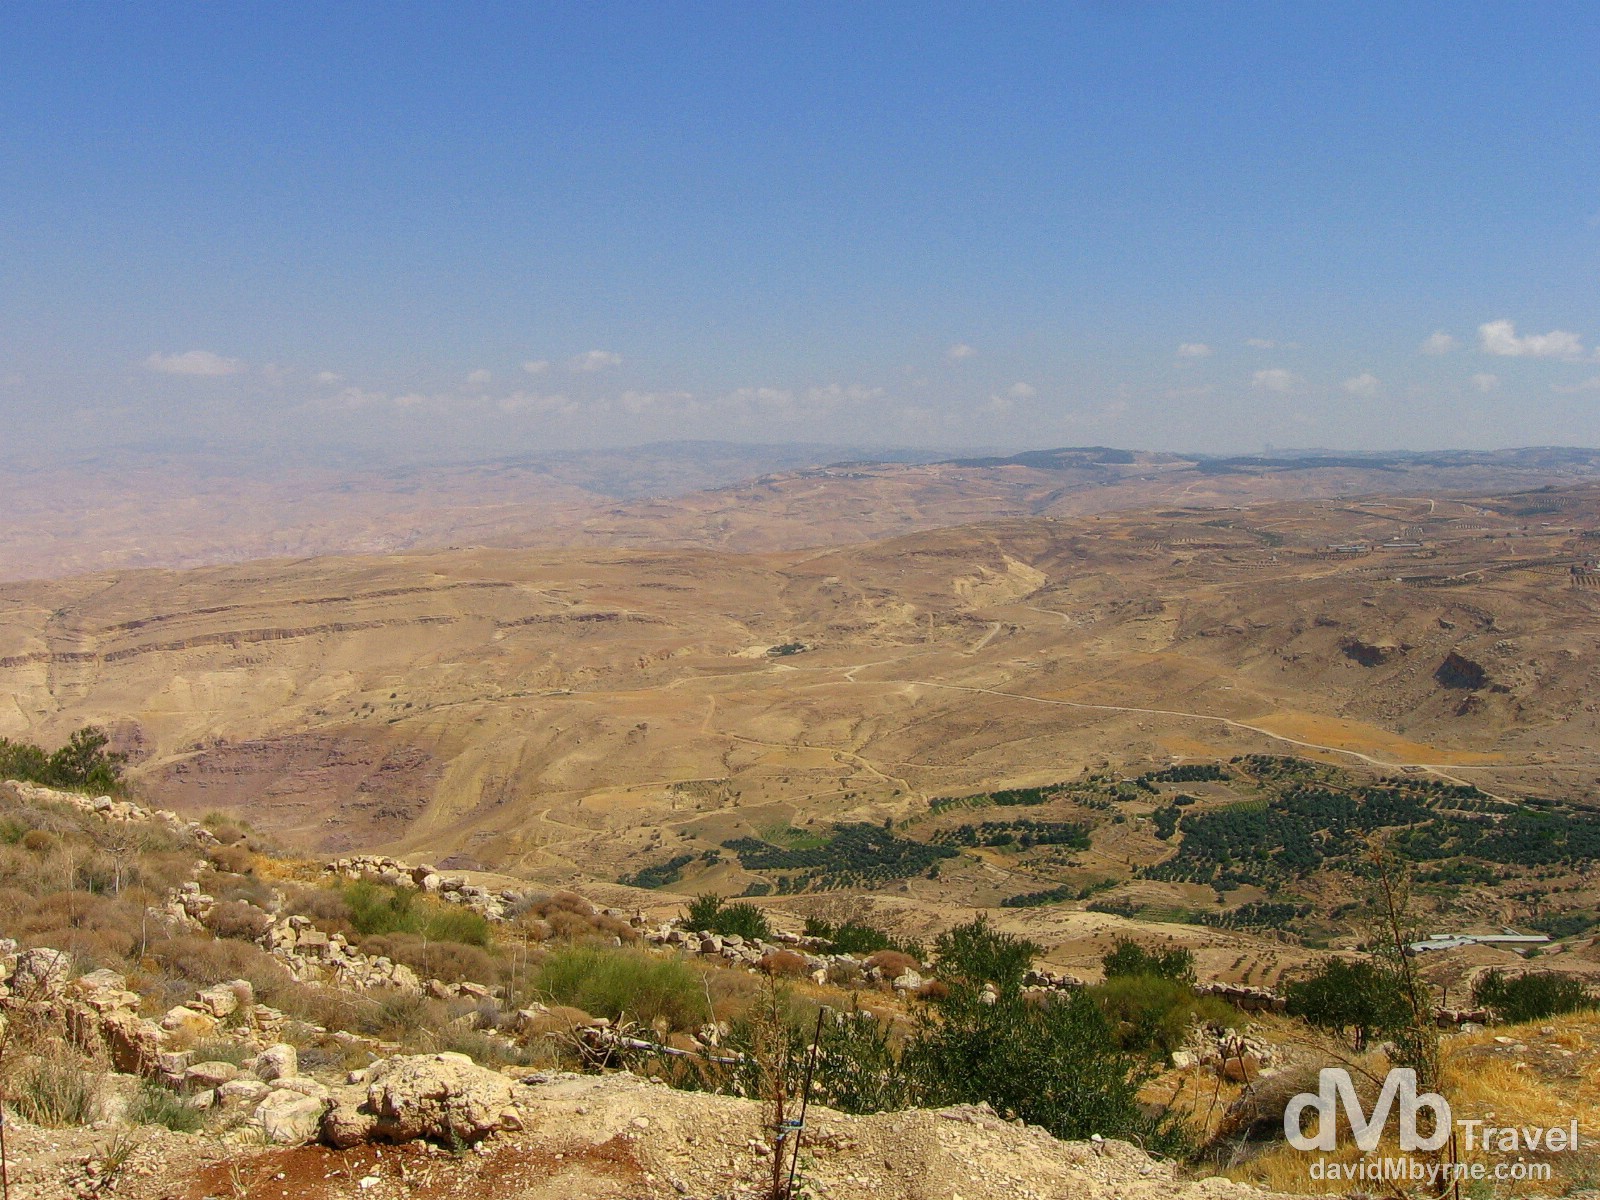 The view of the Promised Land from Mount Nebo near the Israeli/Jordanian border. April 29, 2008.